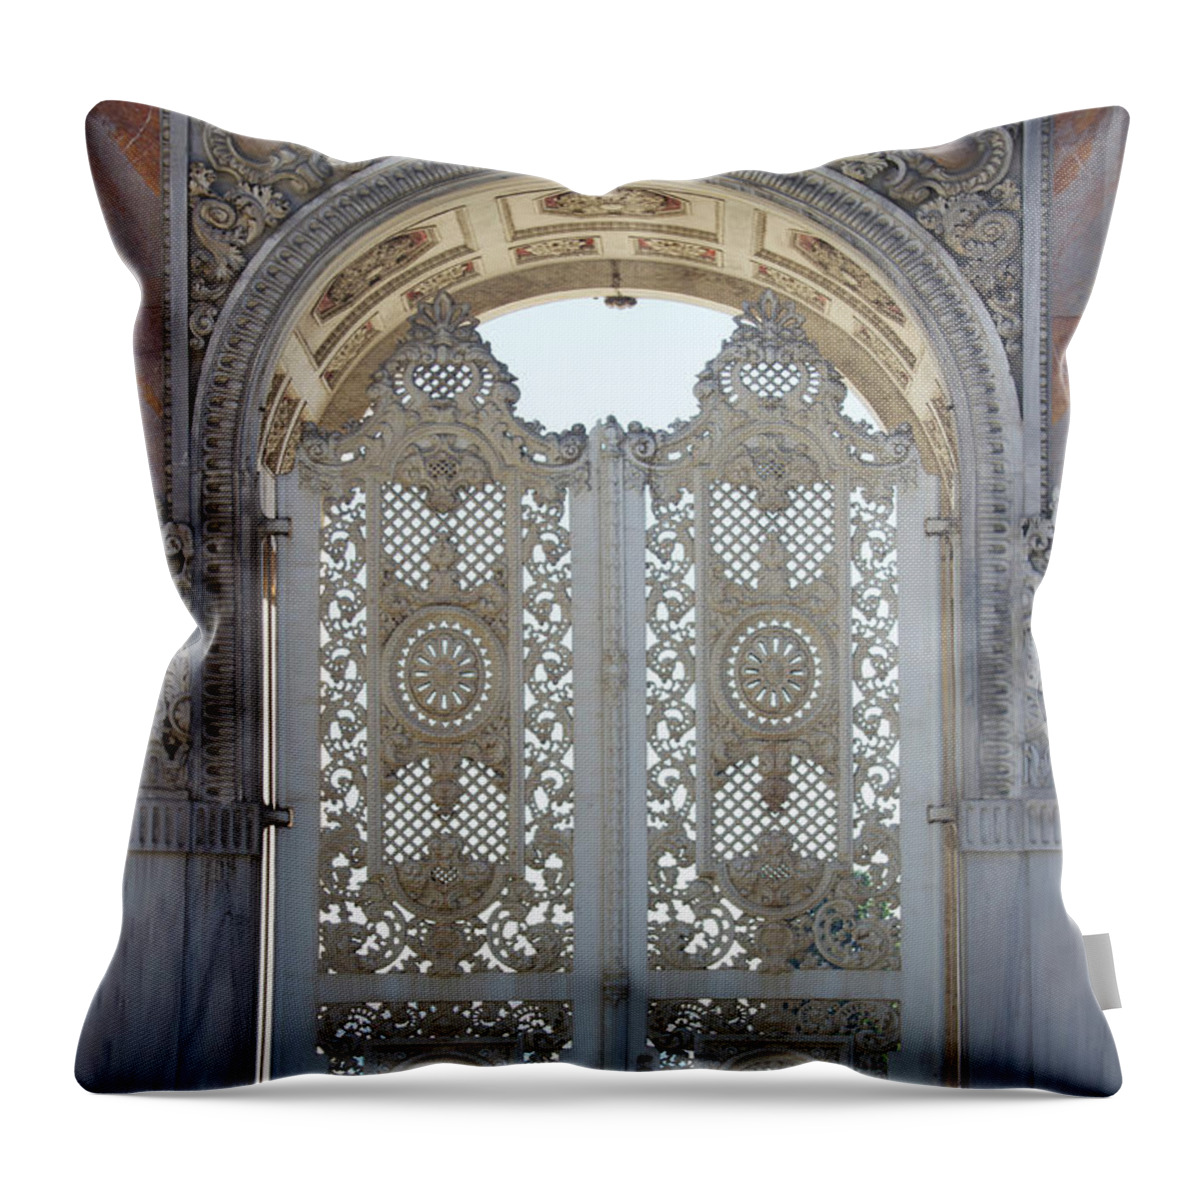 Gothic Style Throw Pillow featuring the photograph Old Door by Bagi1998